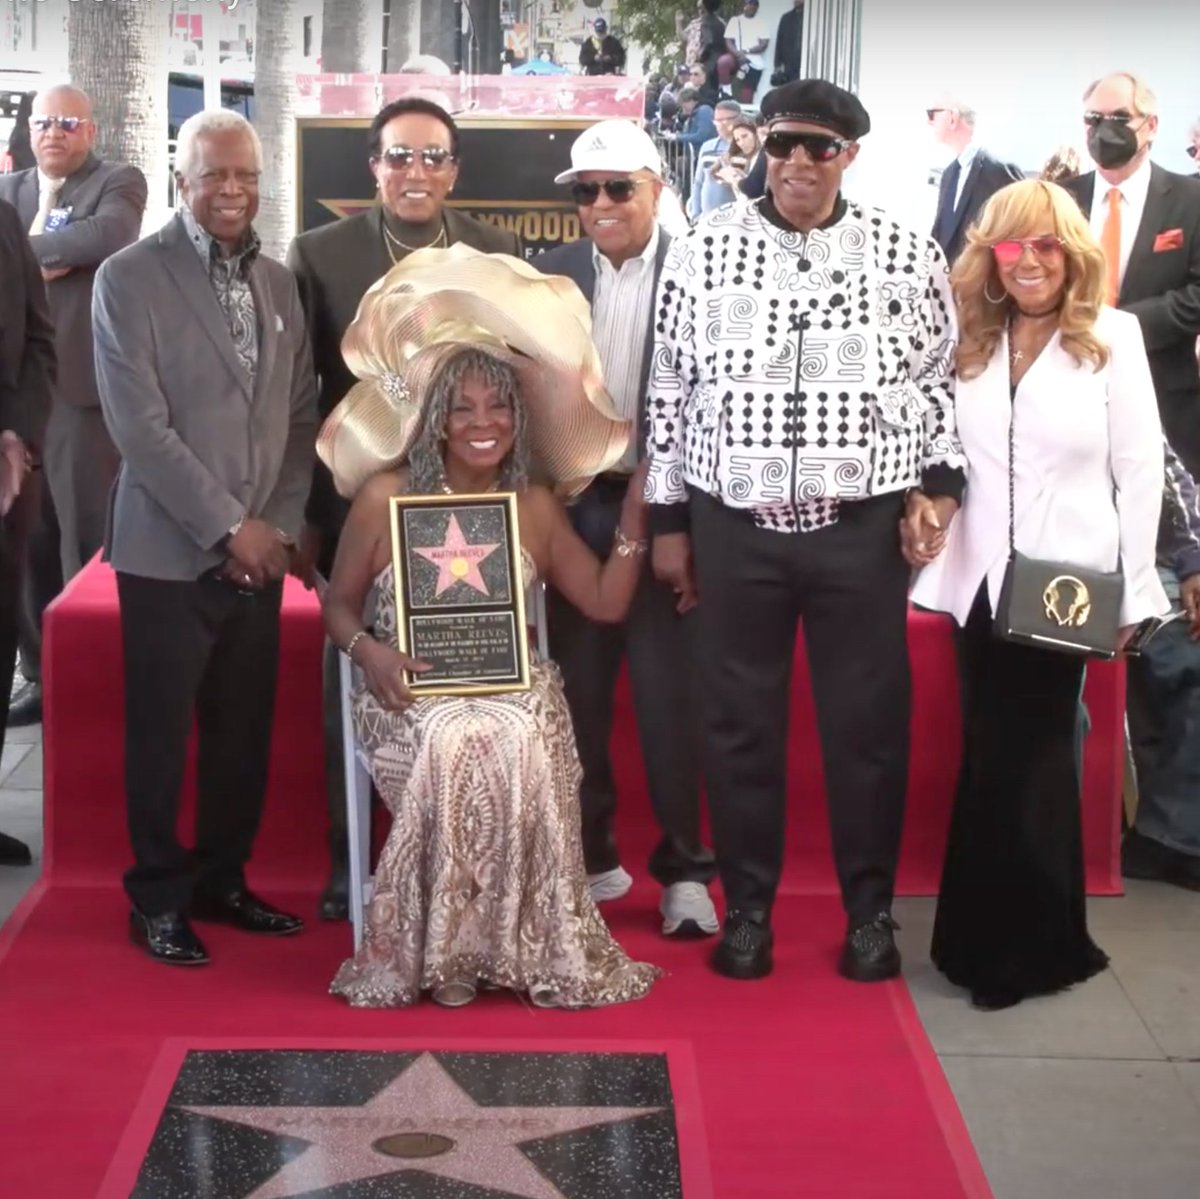 A big congratulations to @MARTHAREEVESvan on receiving her star on the @WalkofFameStar! 

It was a lovely day to celebrate this @Motown Queen.✨

Pic: #MickeyStevenson @smokeyrobinson #MarthaReeves #BerryGordy @StevieWonder @ClaudetteRobinson - #FirstLadyofMotown